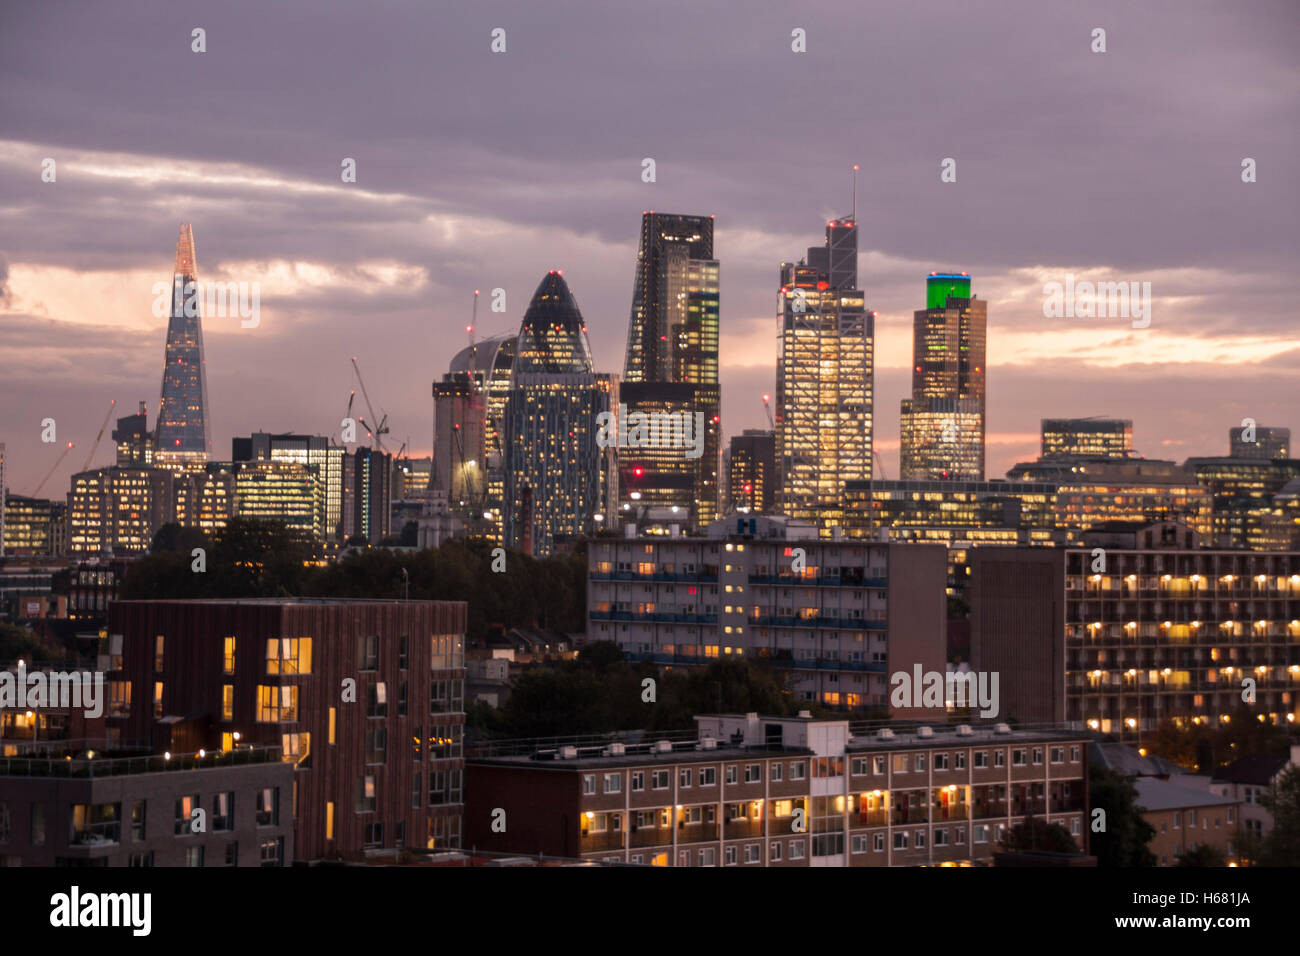 A night time view of the London city skyline including the Shard,Cheesegrater,Walkie Talkie and Gherkin Stock Photo